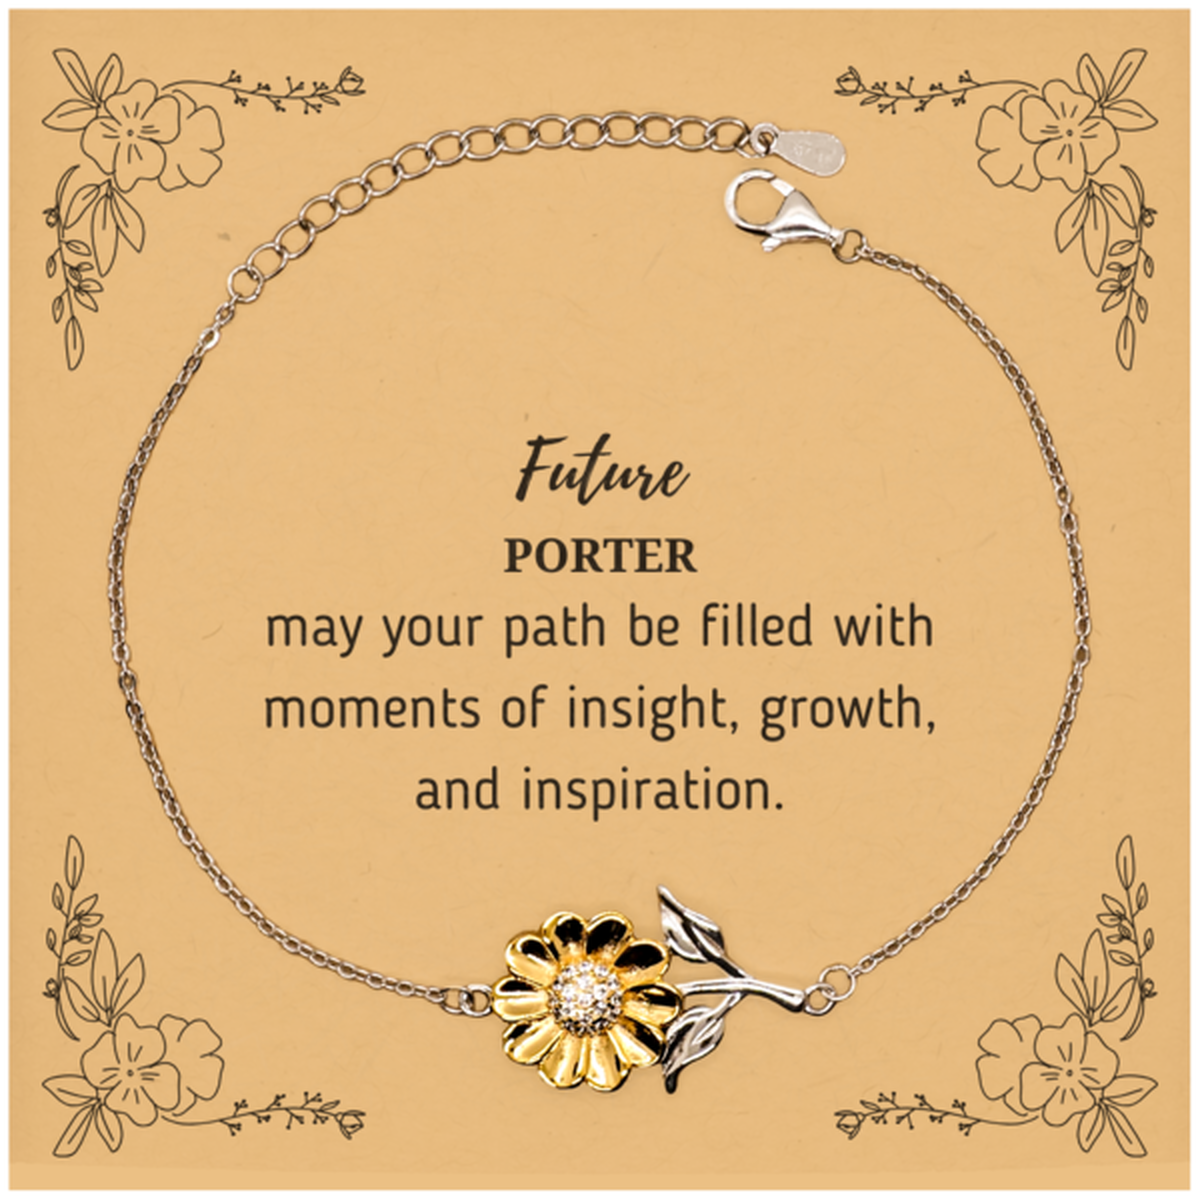 Future Porter Gifts, May your path be filled with moments of insight, Graduation Gifts for New Porter, Christmas Unique Sunflower Bracelet For Men, Women, Friends